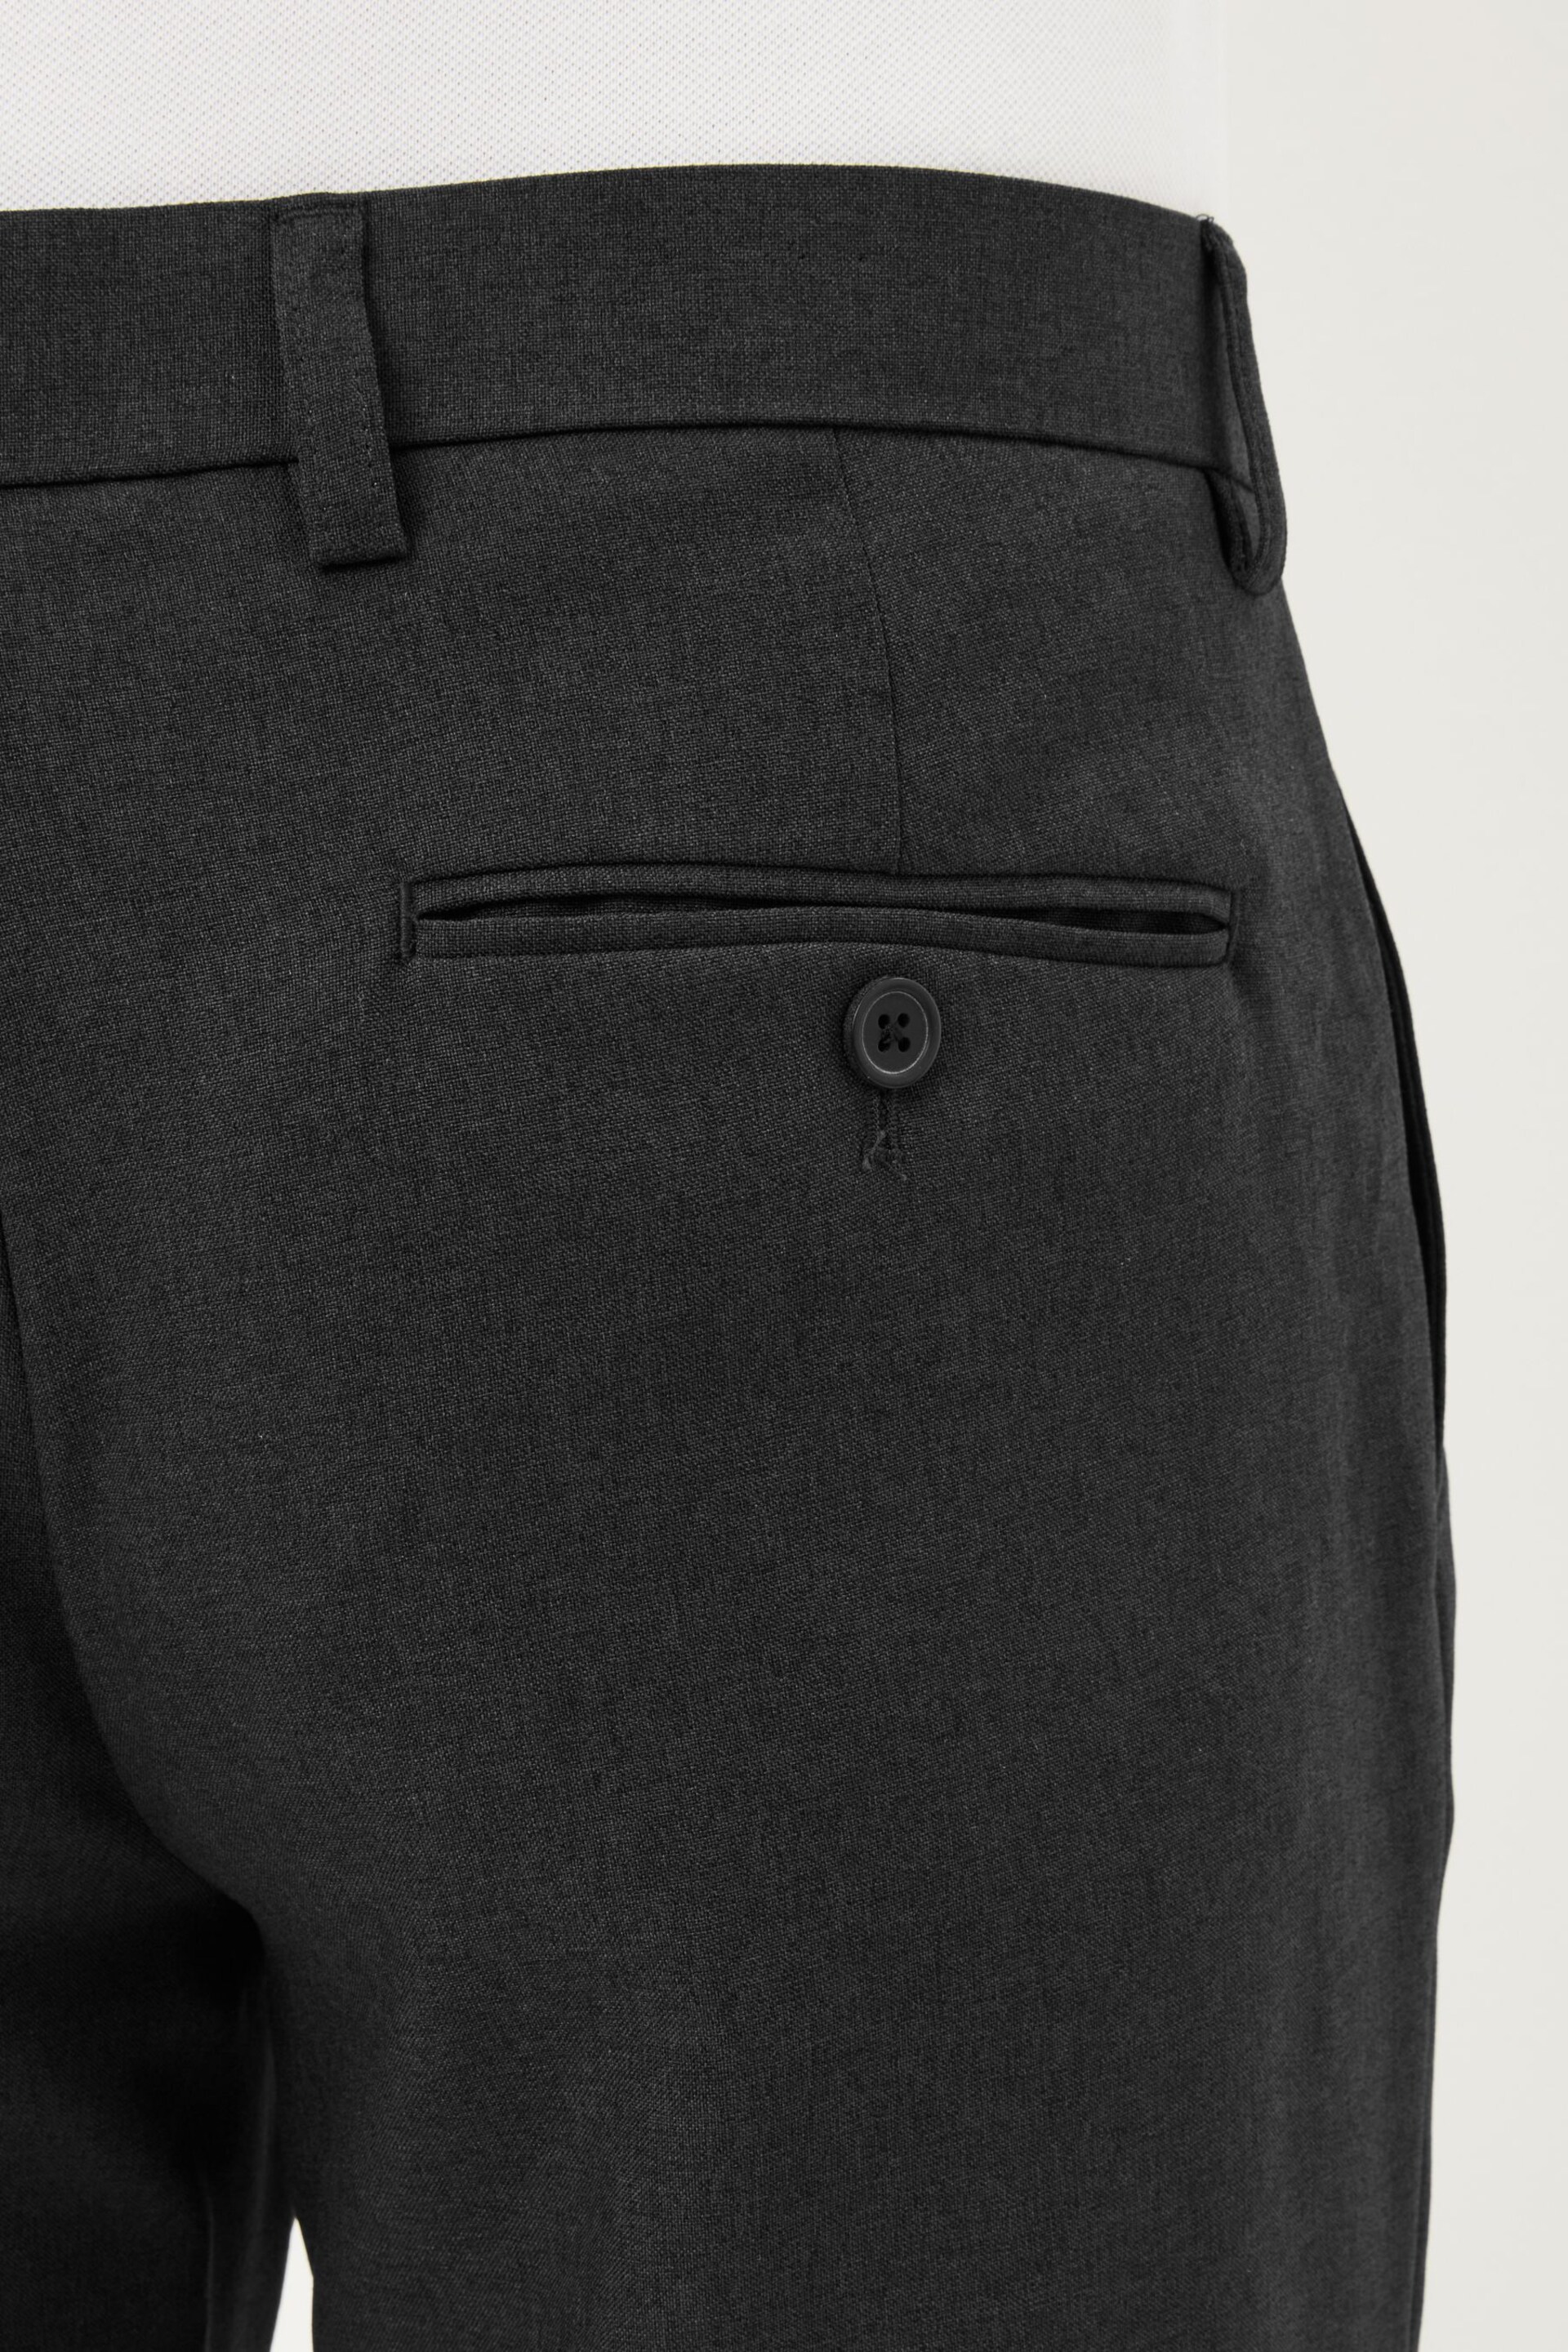 Charcoal Grey Skinny Machine Washable Plain Front Smart Trousers - Image 6 of 8